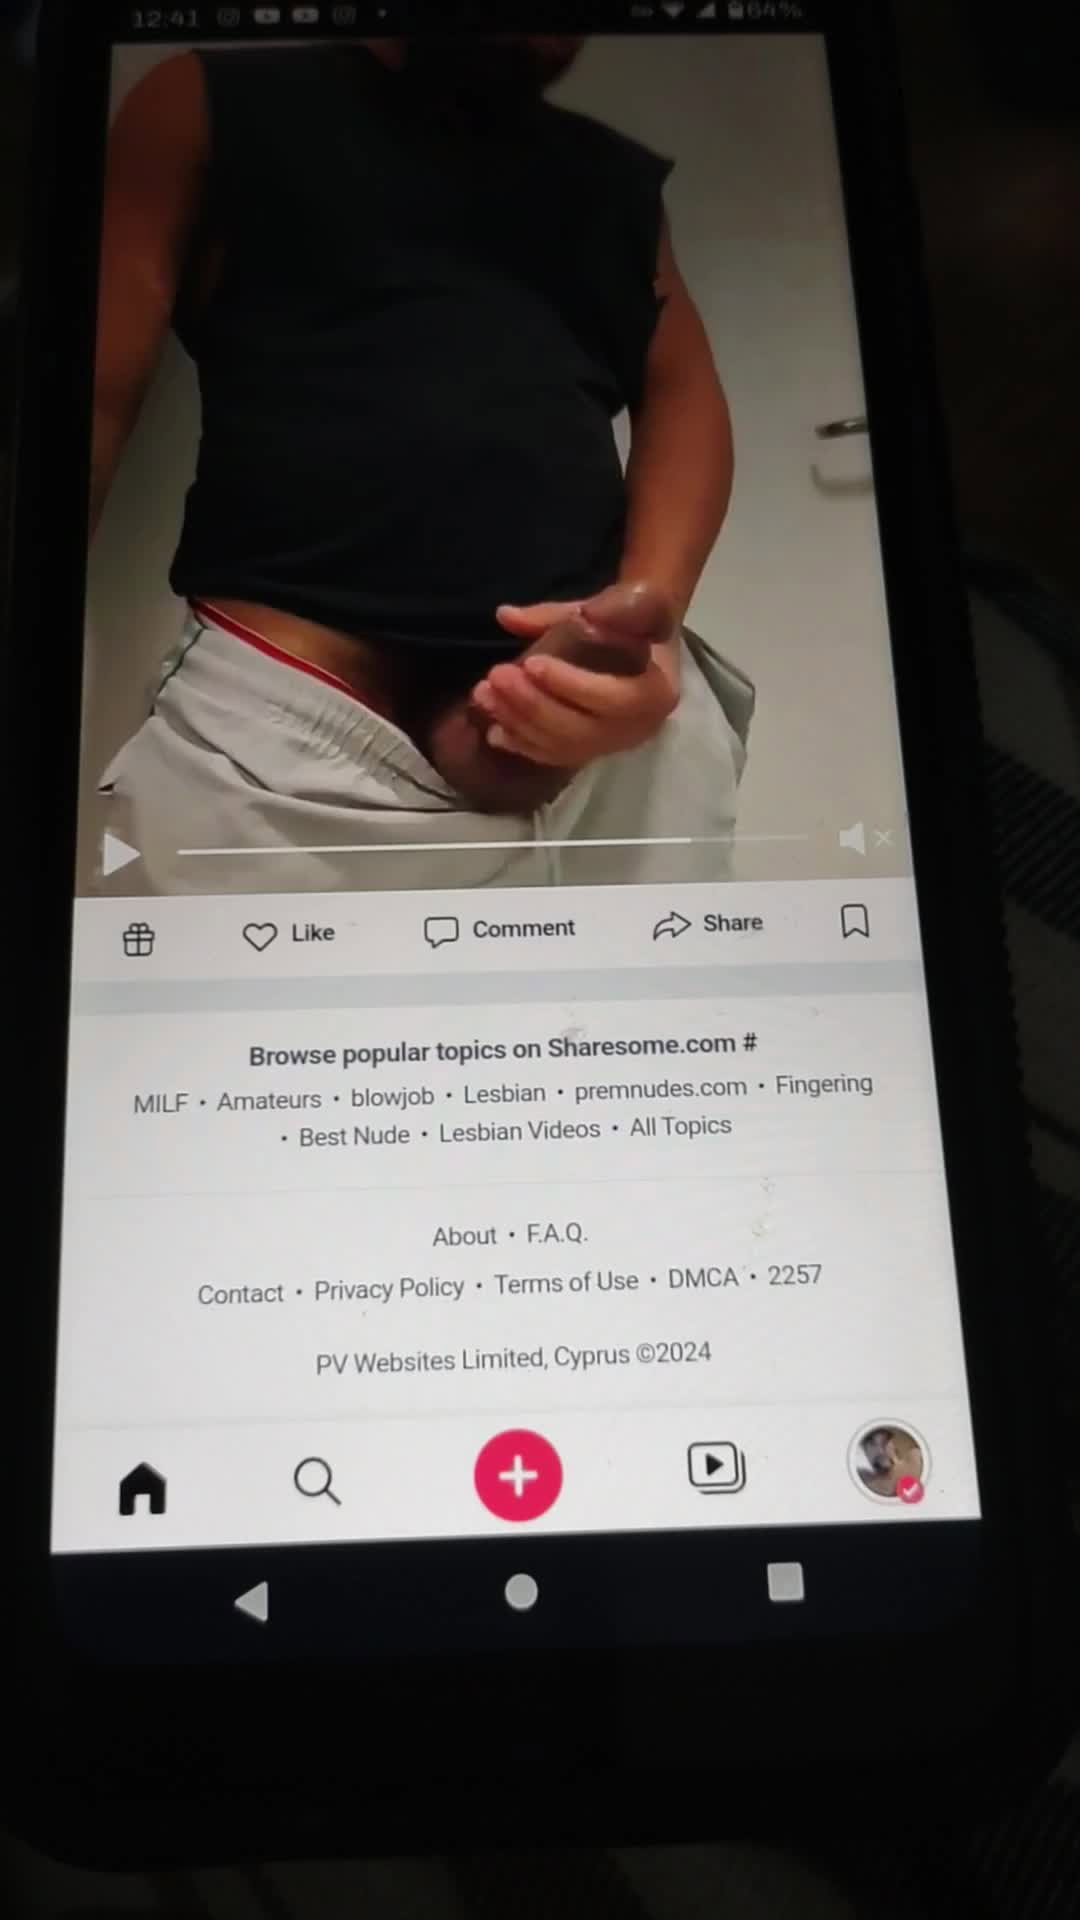 Video by LicksHairyHoles71 with the username @LicksHairyHoles71, who is a verified user,  May 20, 2024 at 8:01 PM and the text says 'Anybody else having this issue with this app?'